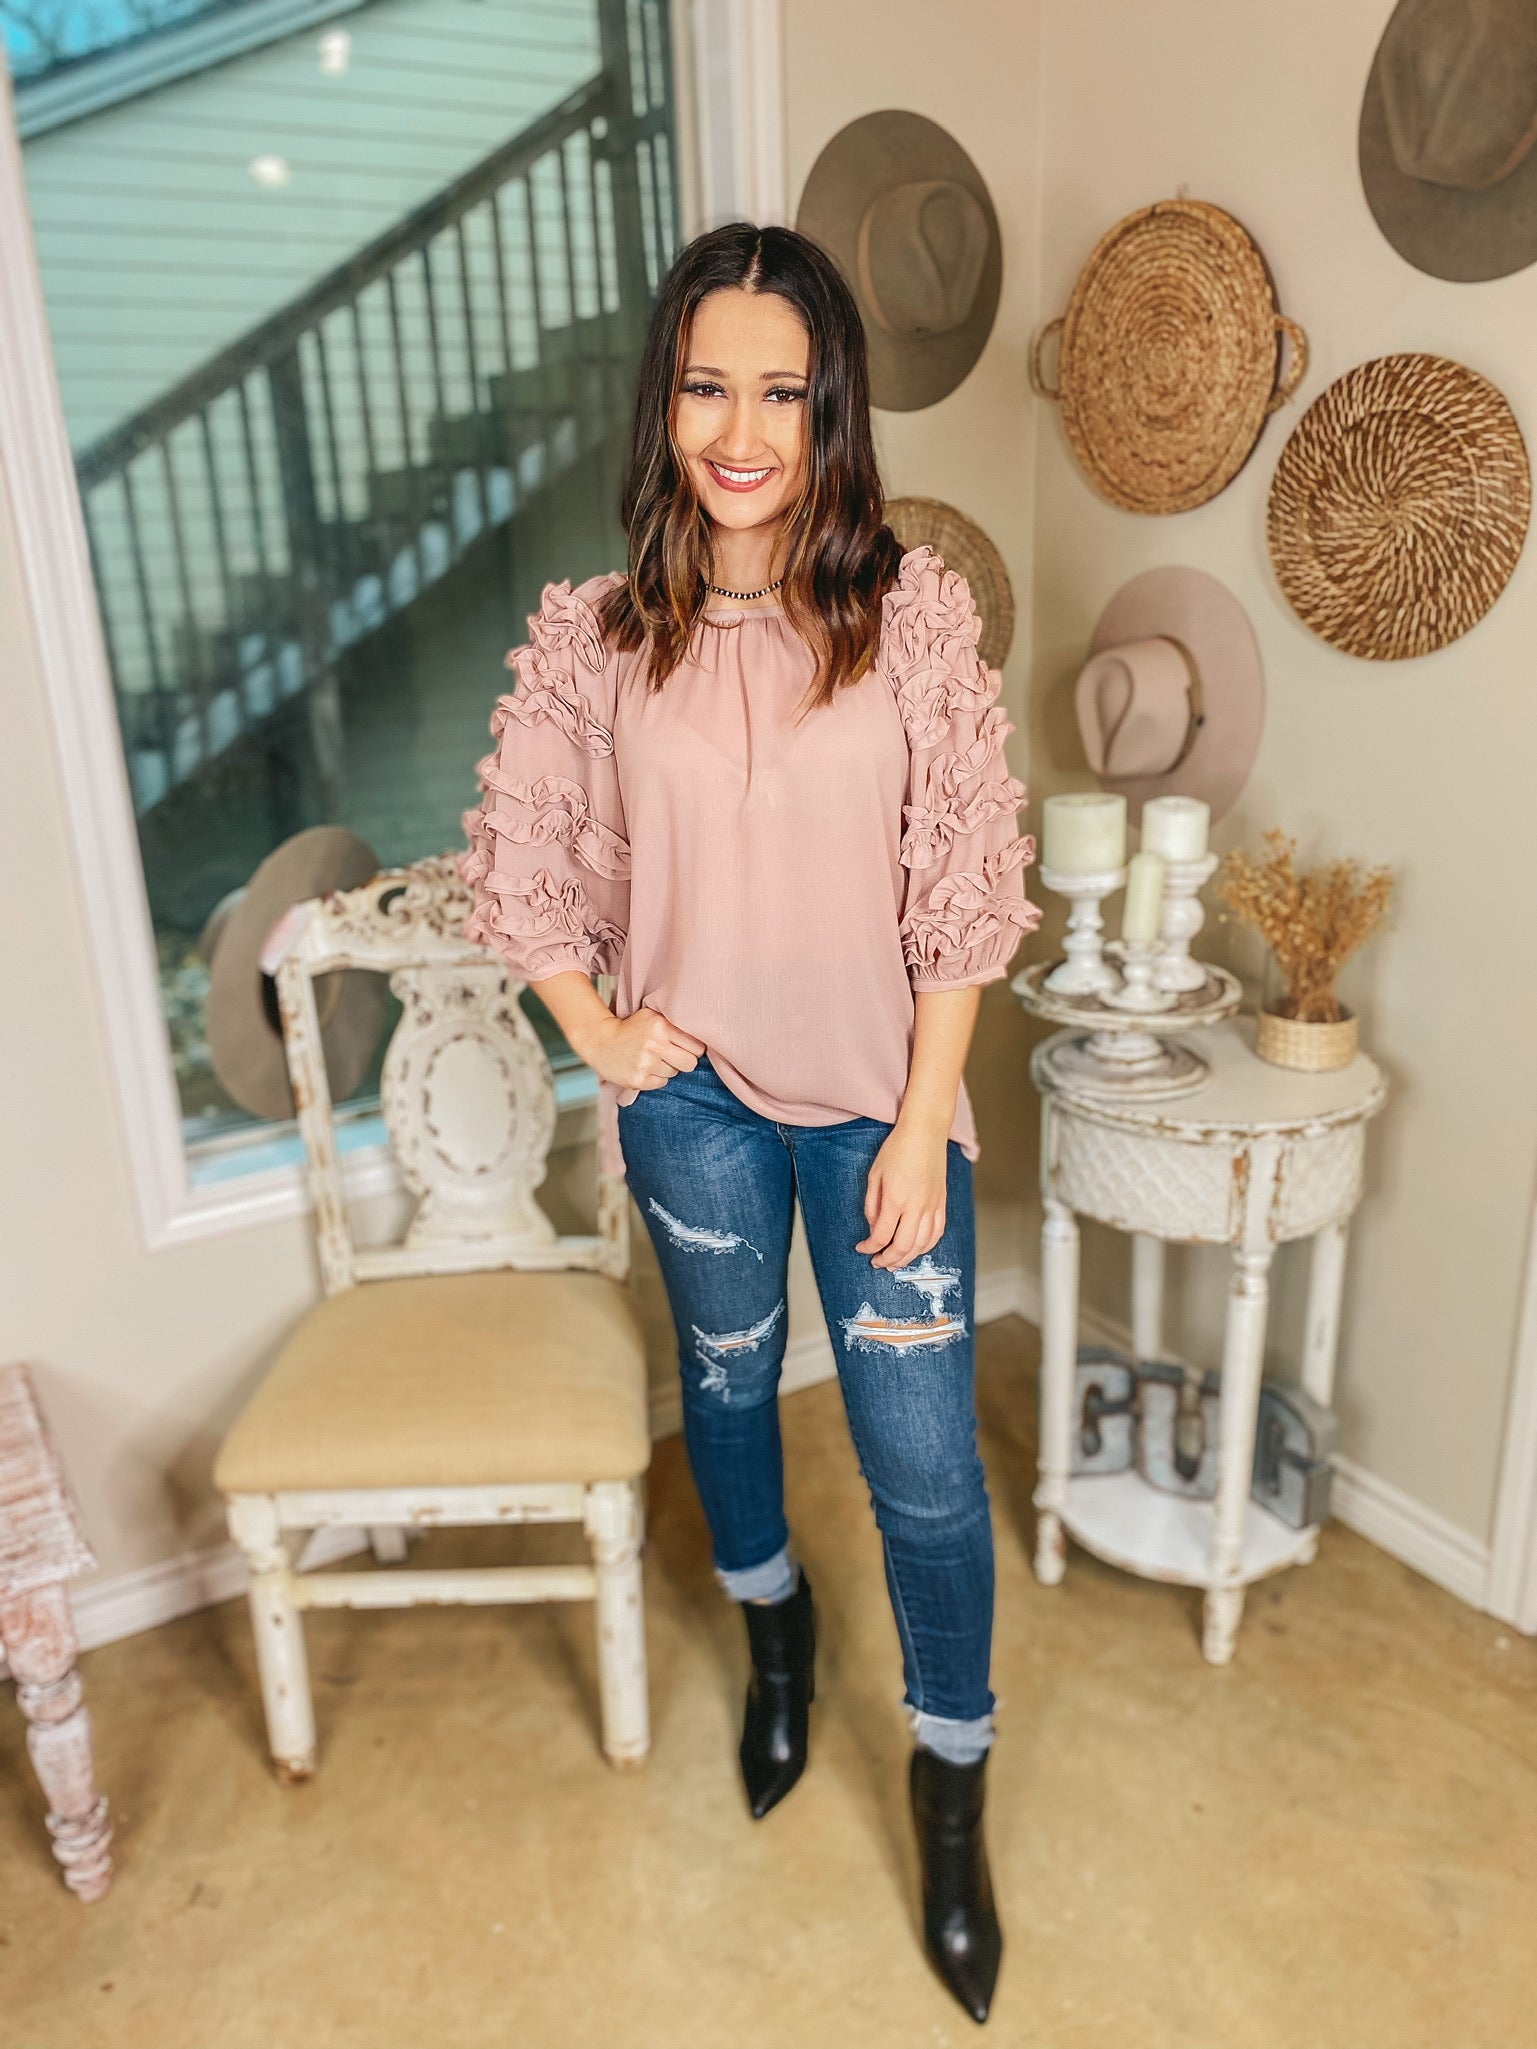 Ruffle My Heart Ruffle 3/4 Sleeve Blouse in Taupe - Giddy Up Glamour Boutique